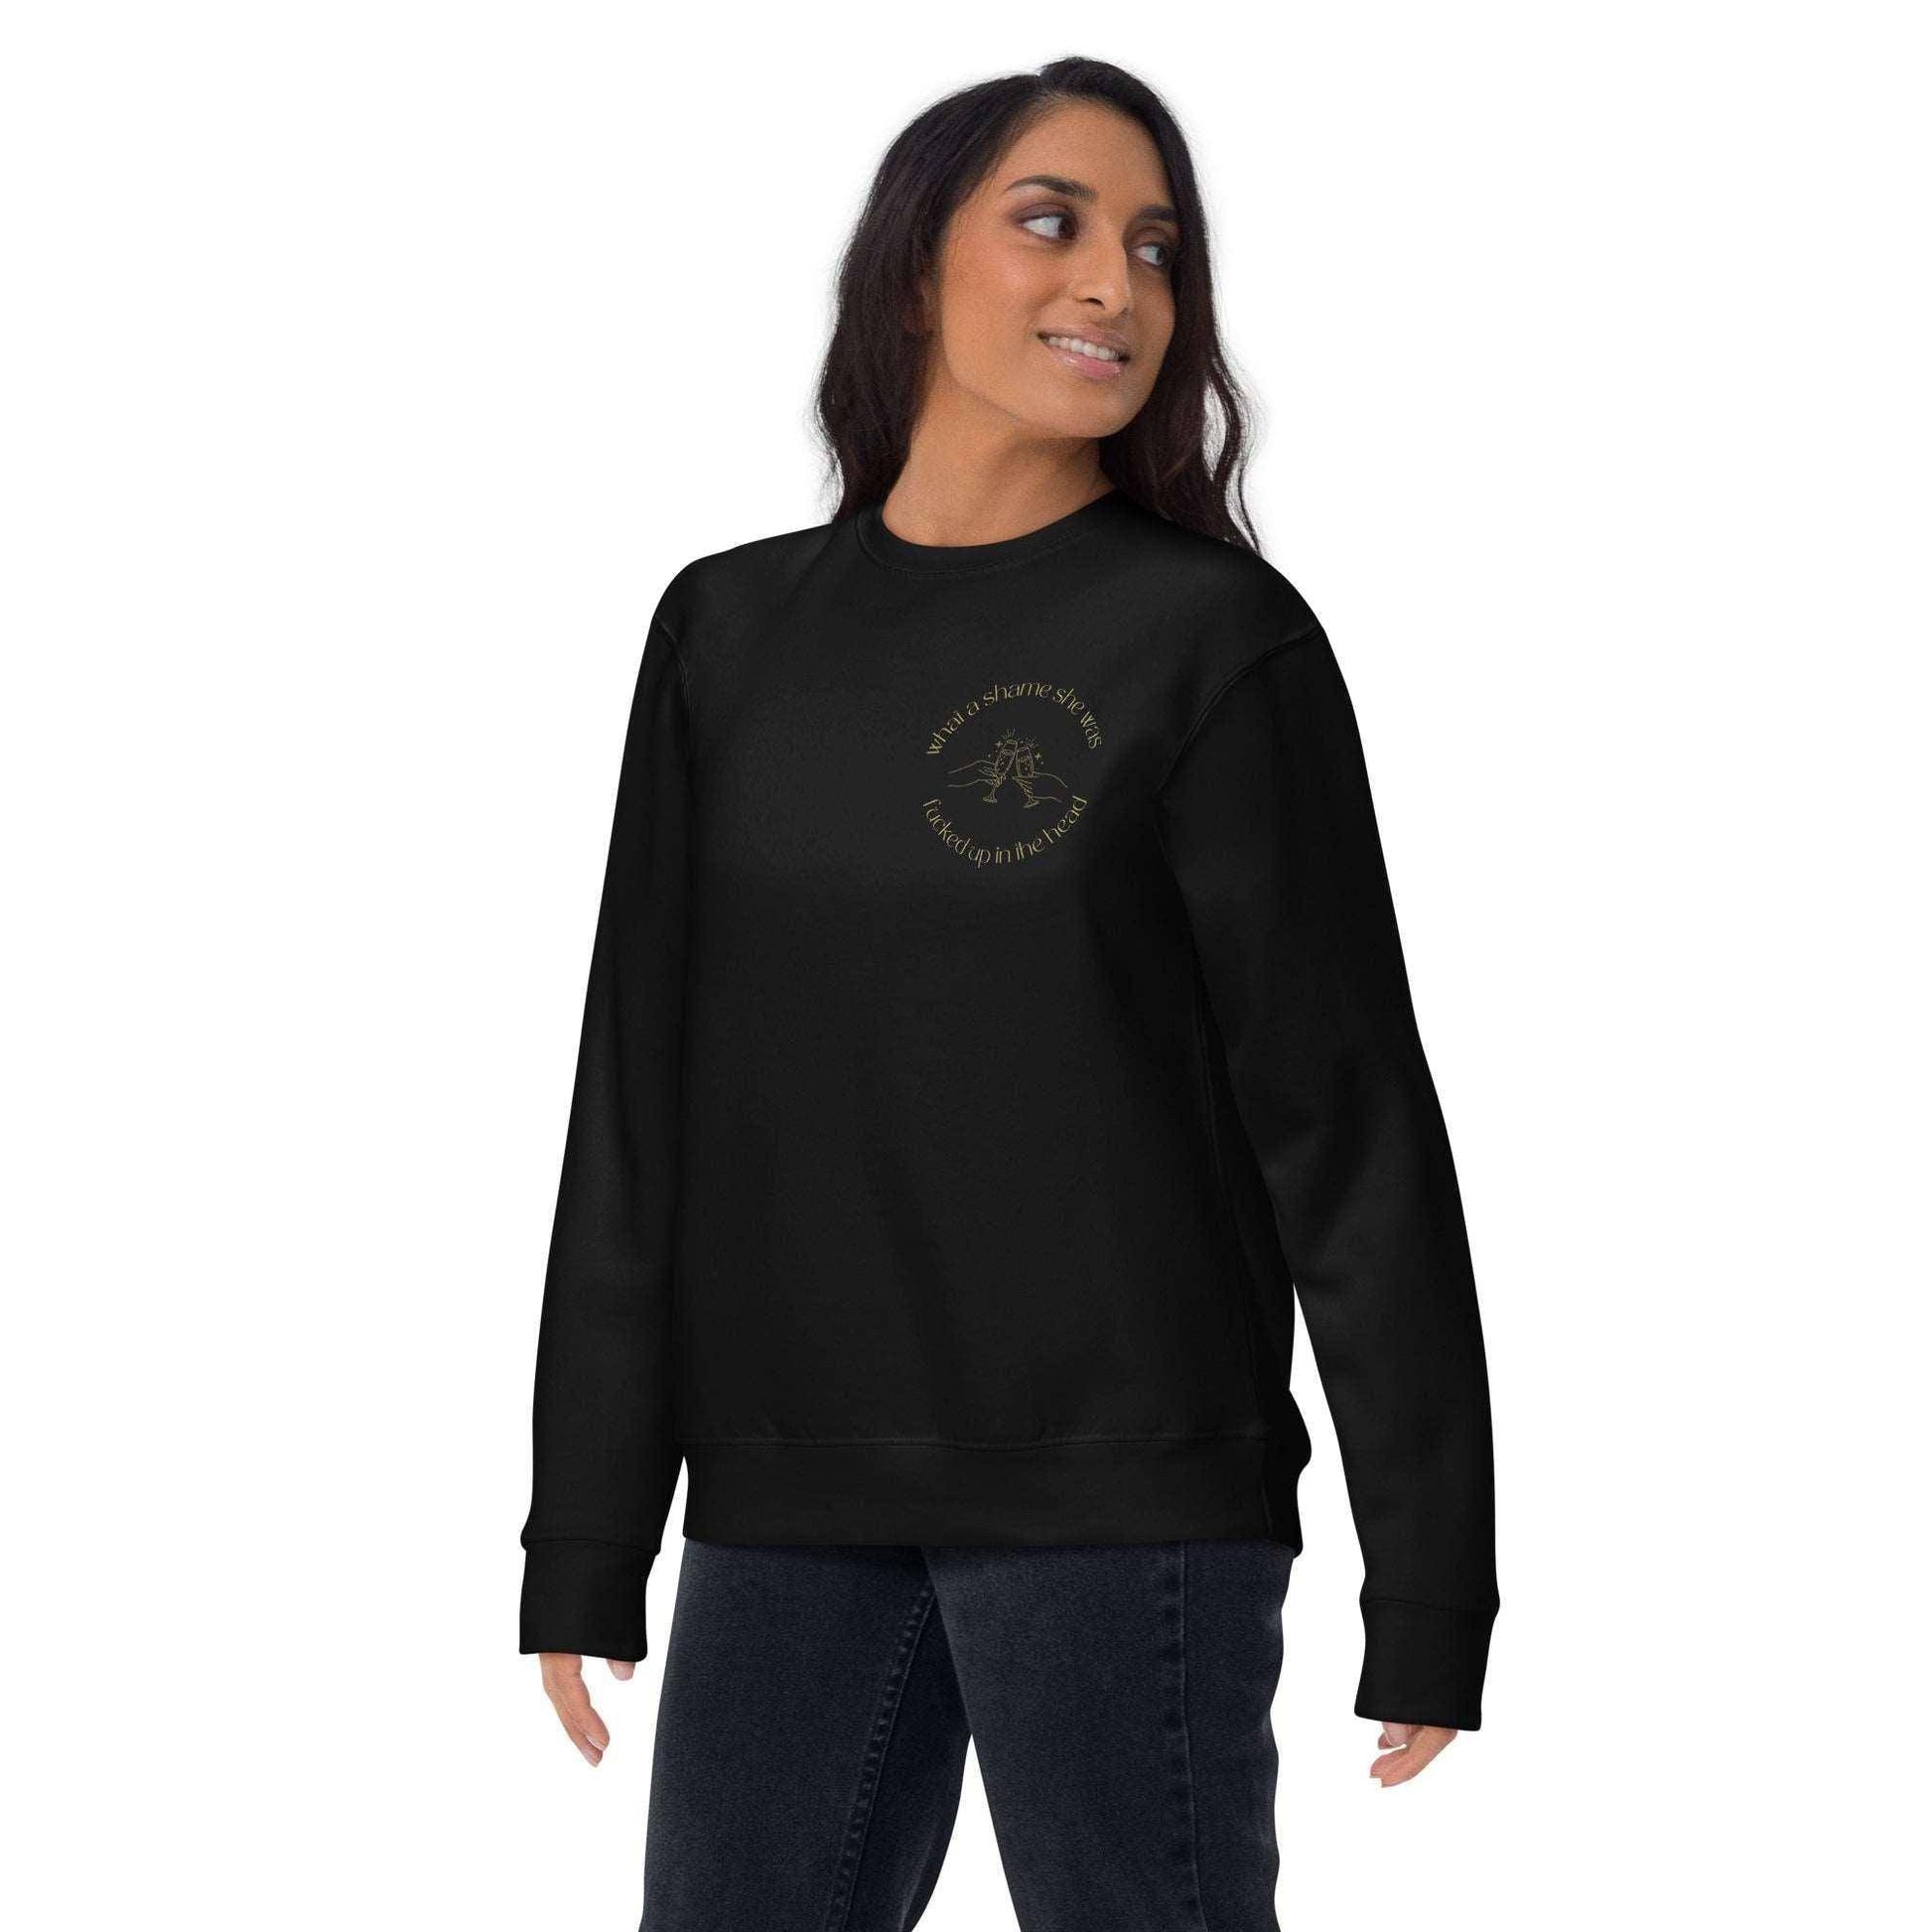 Taylor Swift Champagne Problems Embroidered Sweatshirt